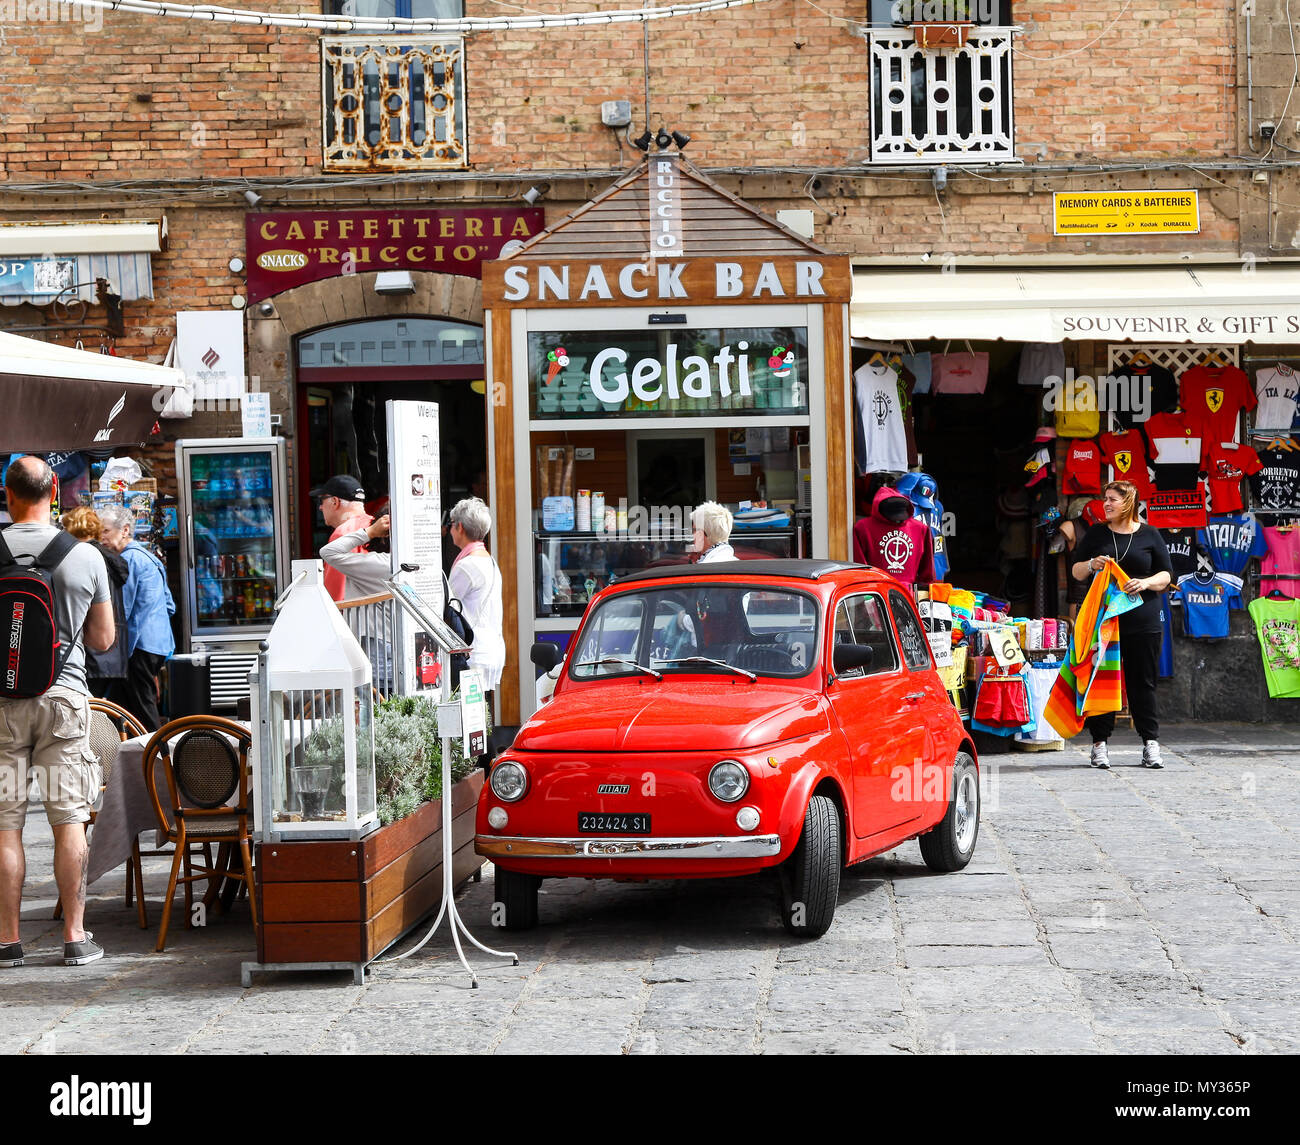 An old red Fiat 500 car advertising the Ruccio Restaurant and Café, Sorrento, Italy Stock Photo